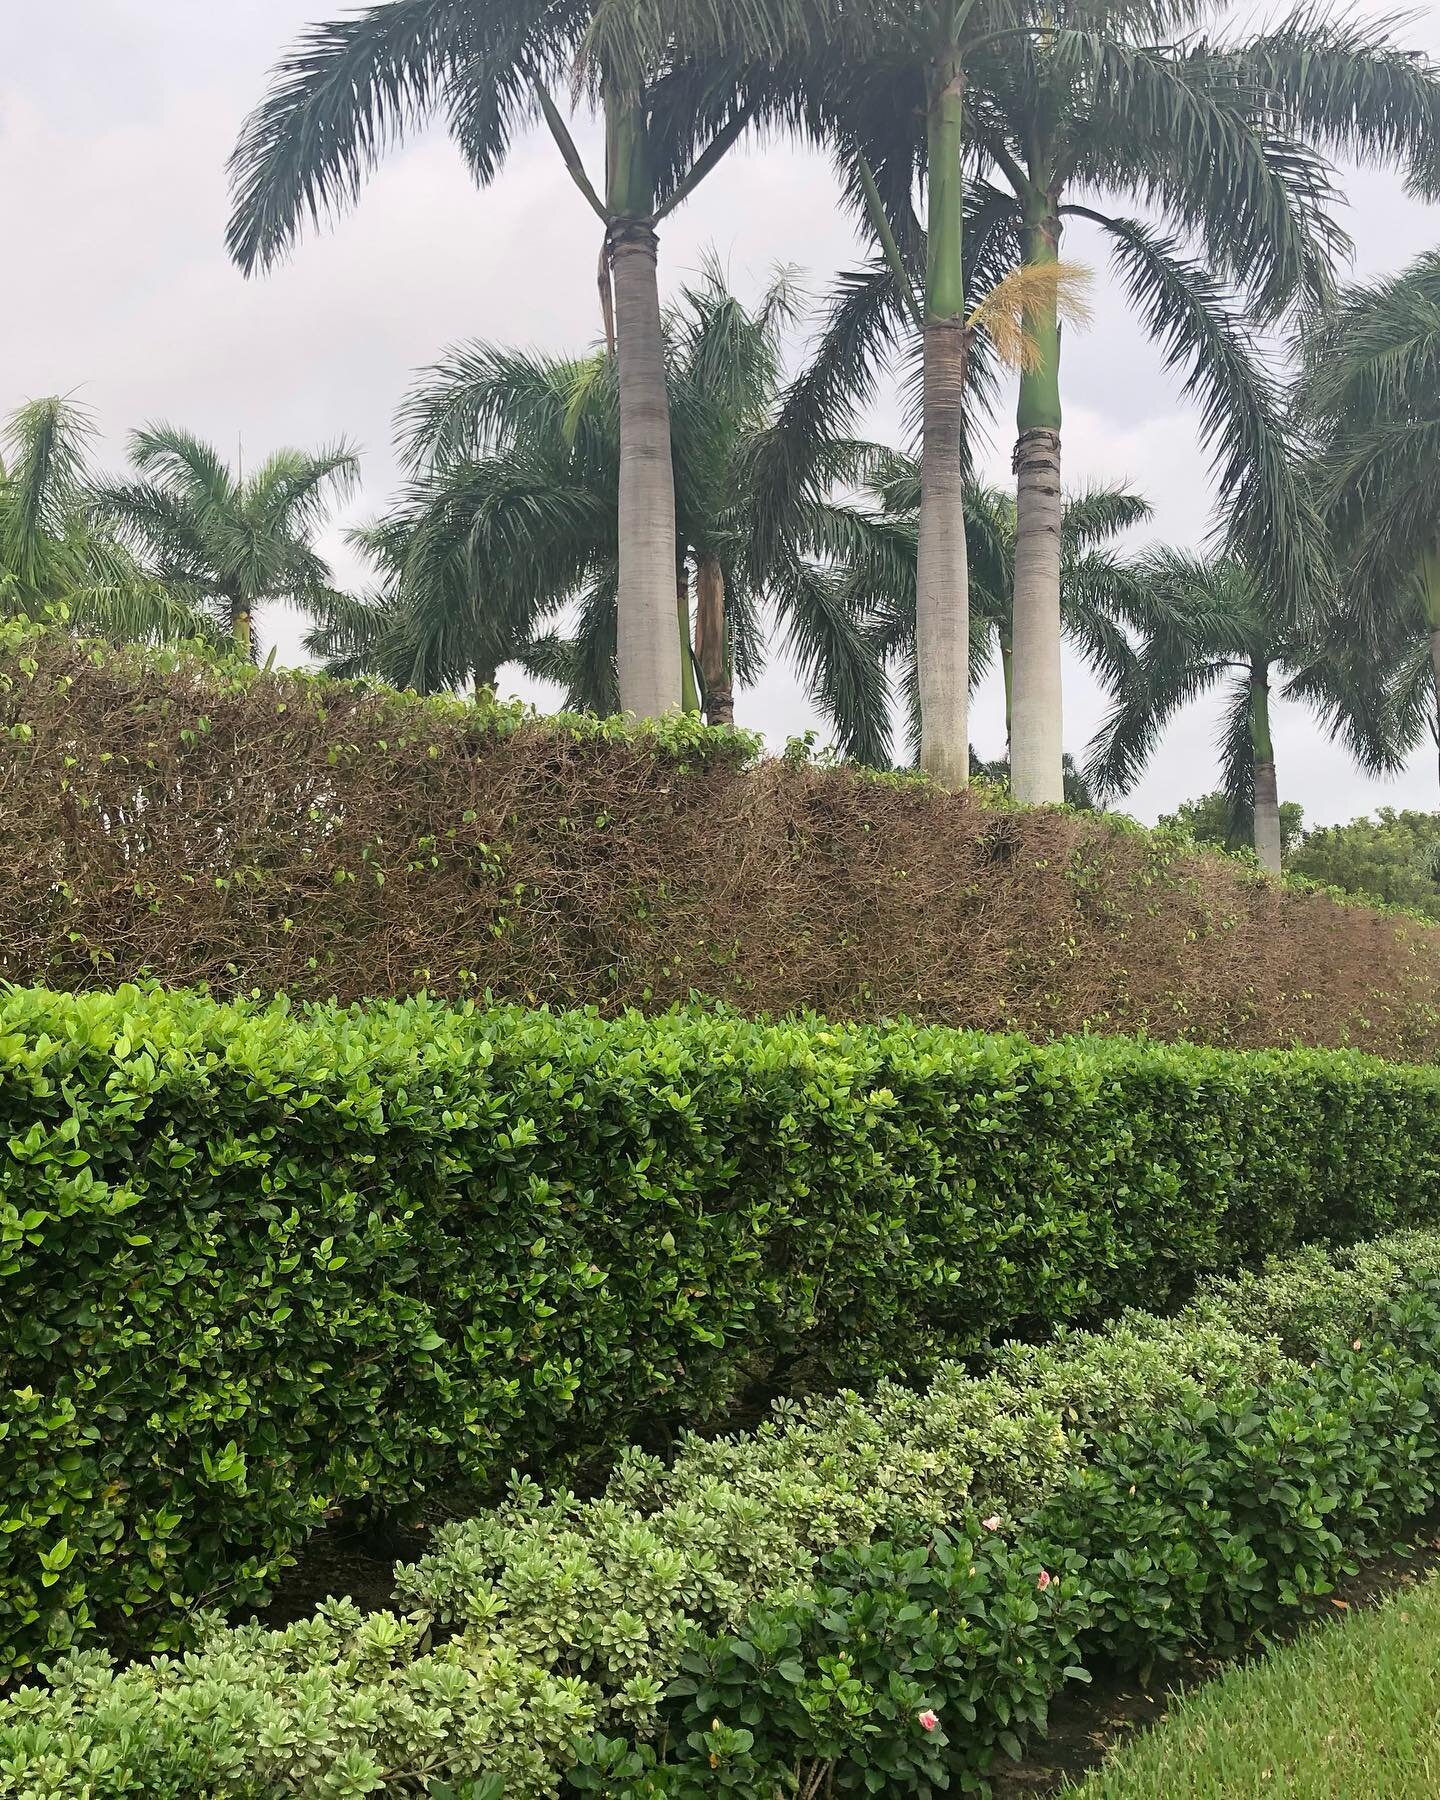 Due to environmental conditions and population cycles, Whitefly has presented in large numbers and has caused severe damage to homeowner's hedges. Ficus whitefly have become much more tolerant to treatment. These new conditions have made it important